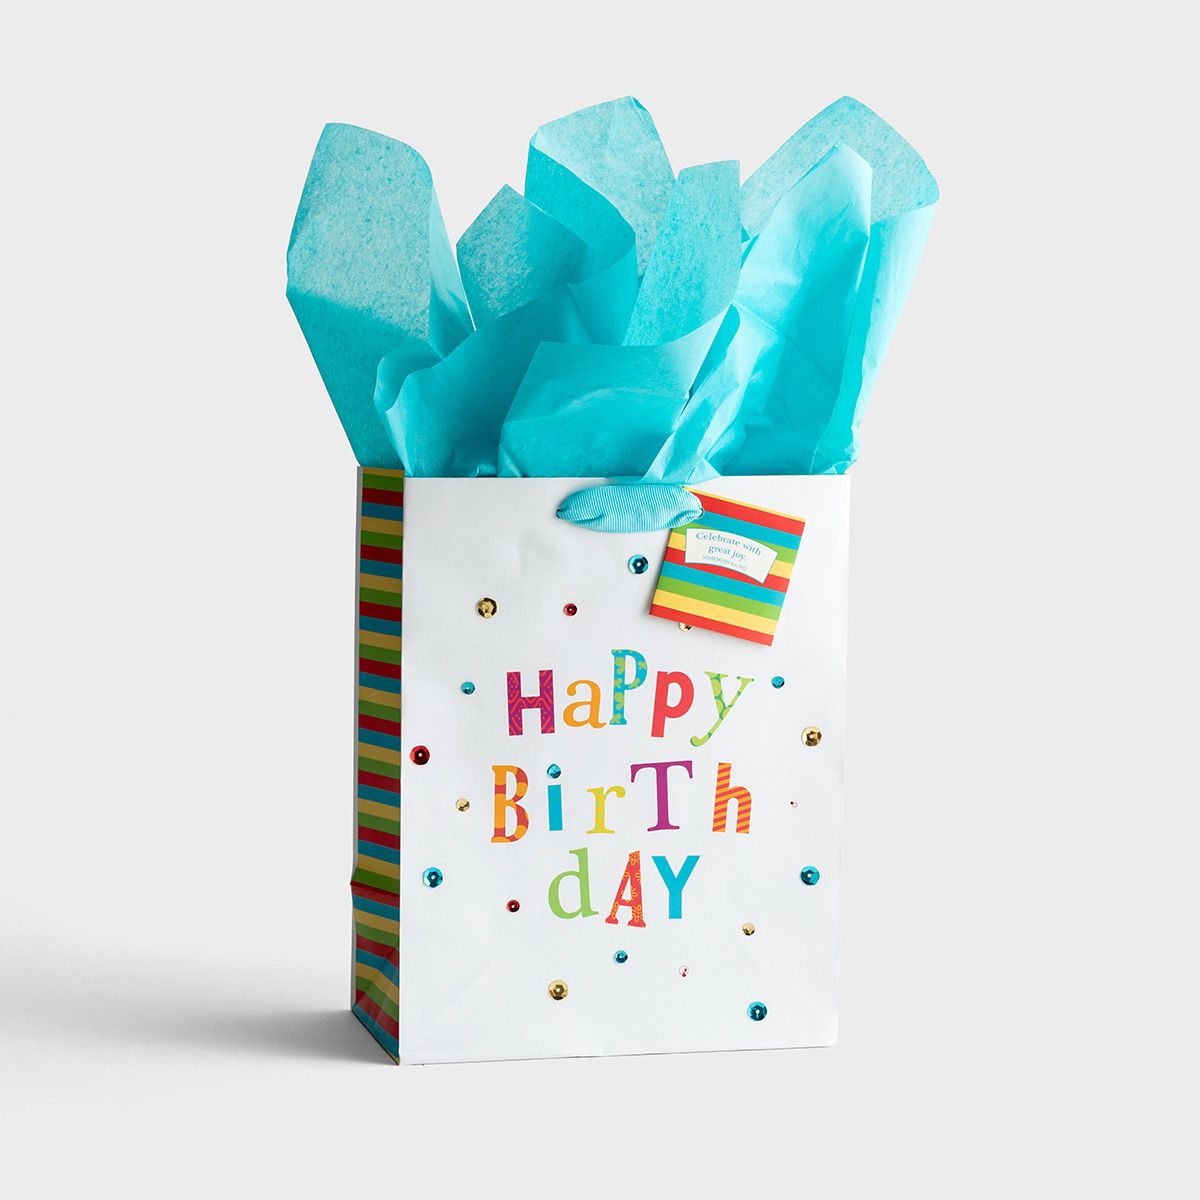 Happy Birthday - Medium Gift Bag with Tissue - The Christian Gift Company